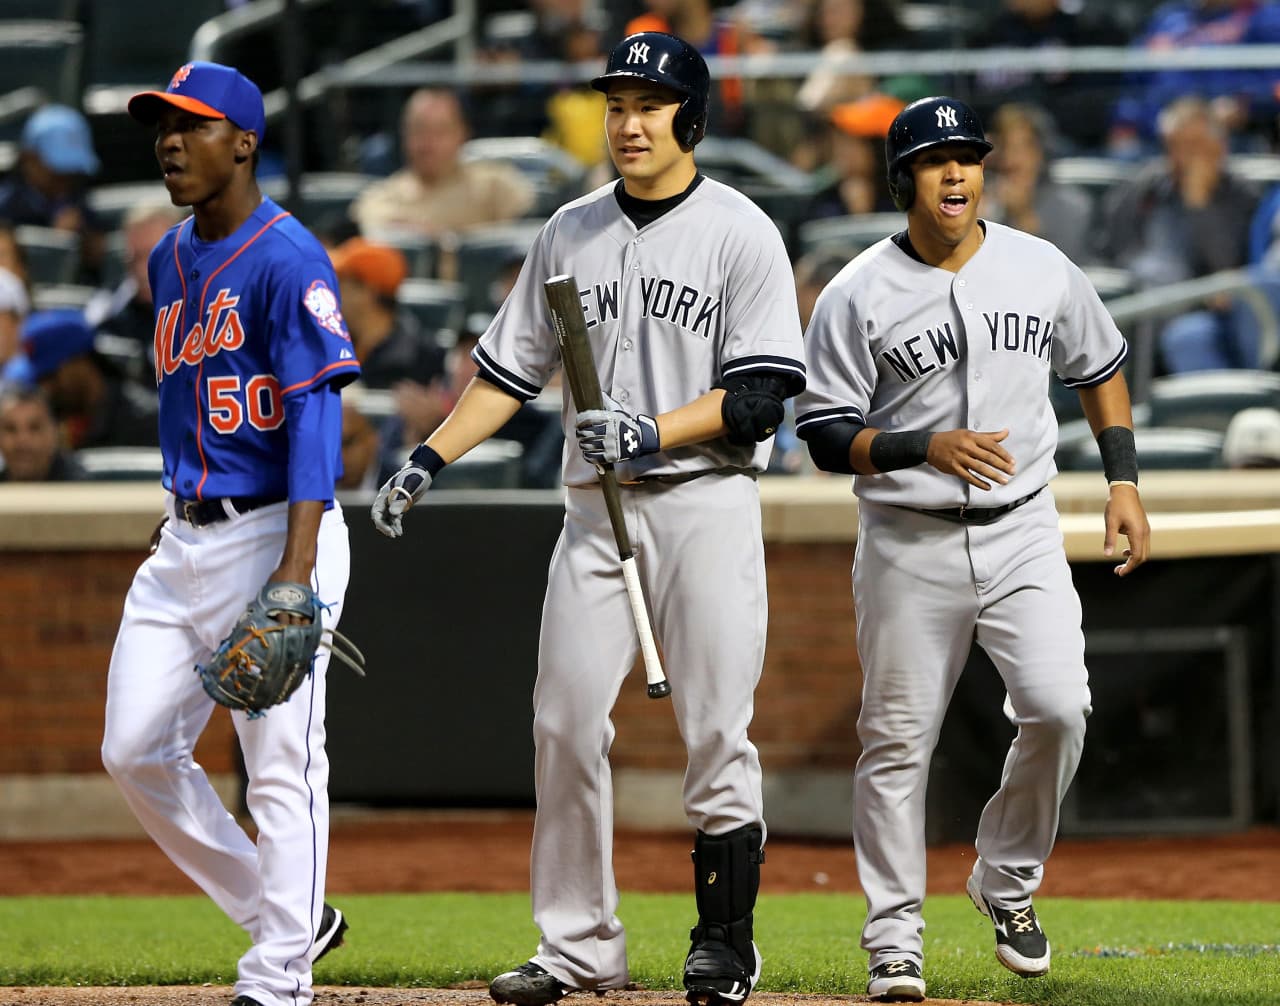 Thanks to interleague play, New Yorkers don't have to wait for both teams to make the World Series to watch the Yankees play the Mets. (Elsa/Getty Images)